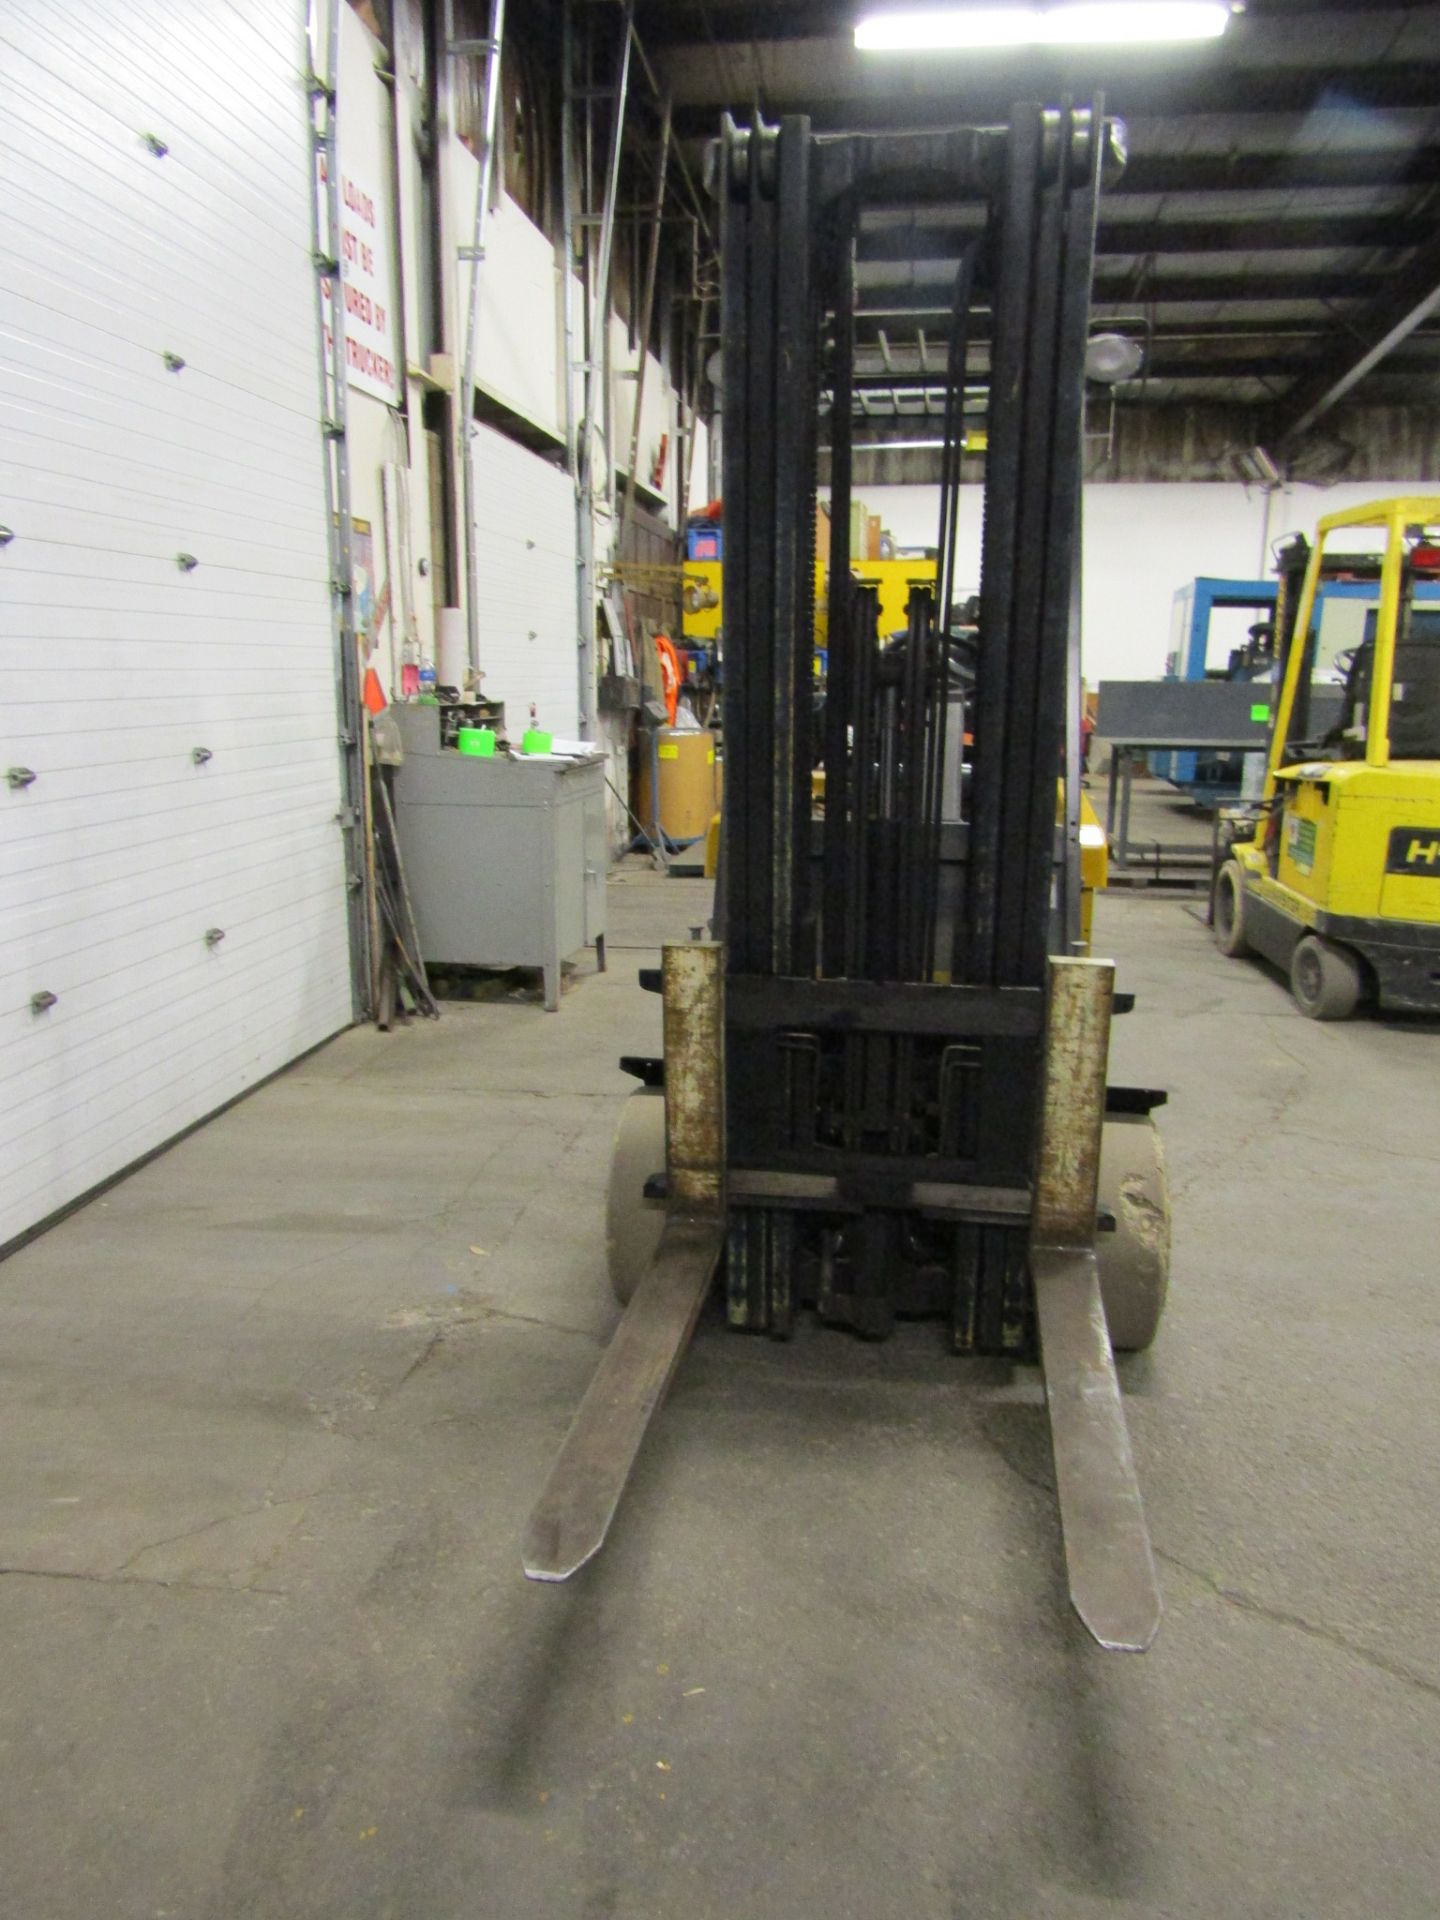 2007 Yale 6000lbs Capacity Electric Forklift with 3-stage mast & sideshift with charger - Image 2 of 2